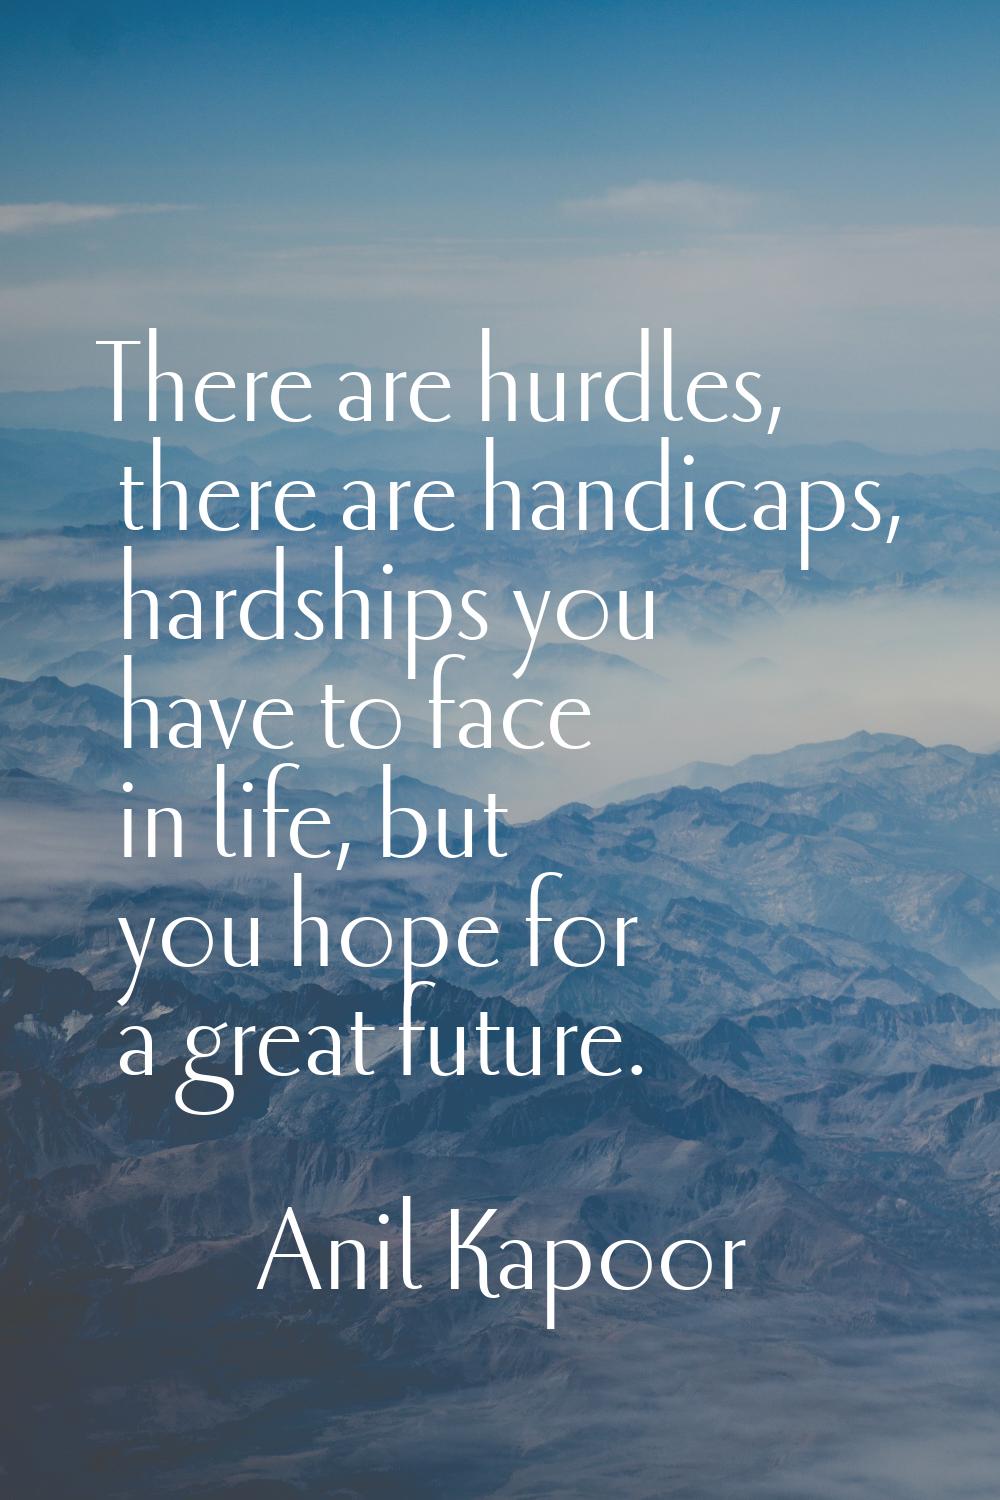 There are hurdles, there are handicaps, hardships you have to face in life, but you hope for a grea